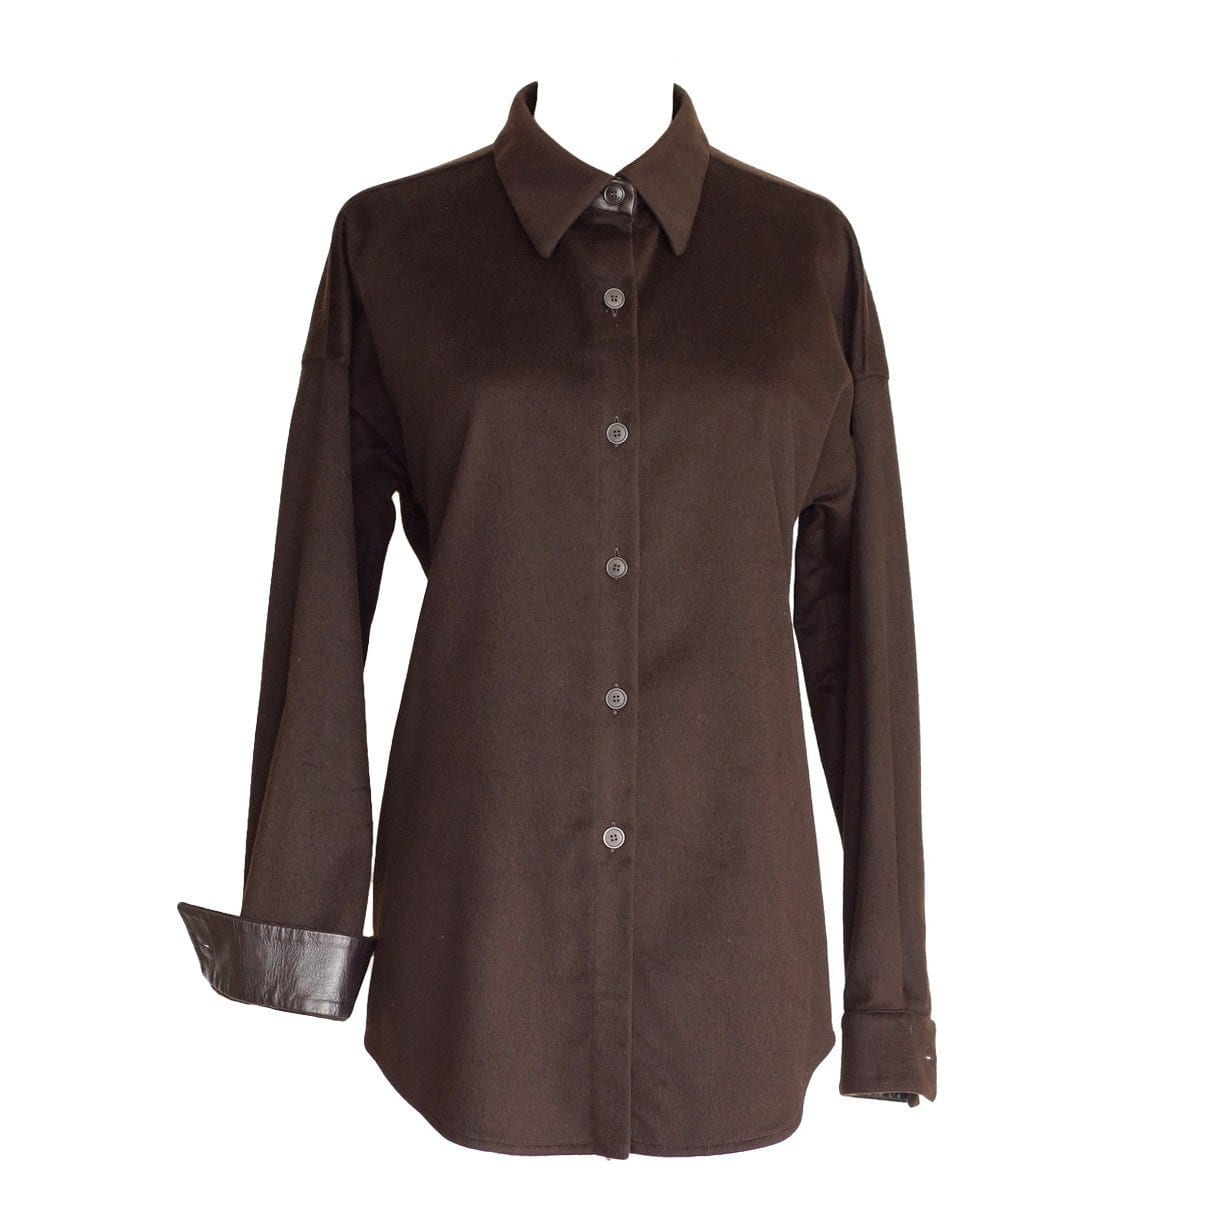 Agnona Top Cashmere Shirt Leather Details Exquisite  46 / 12 - mightychic